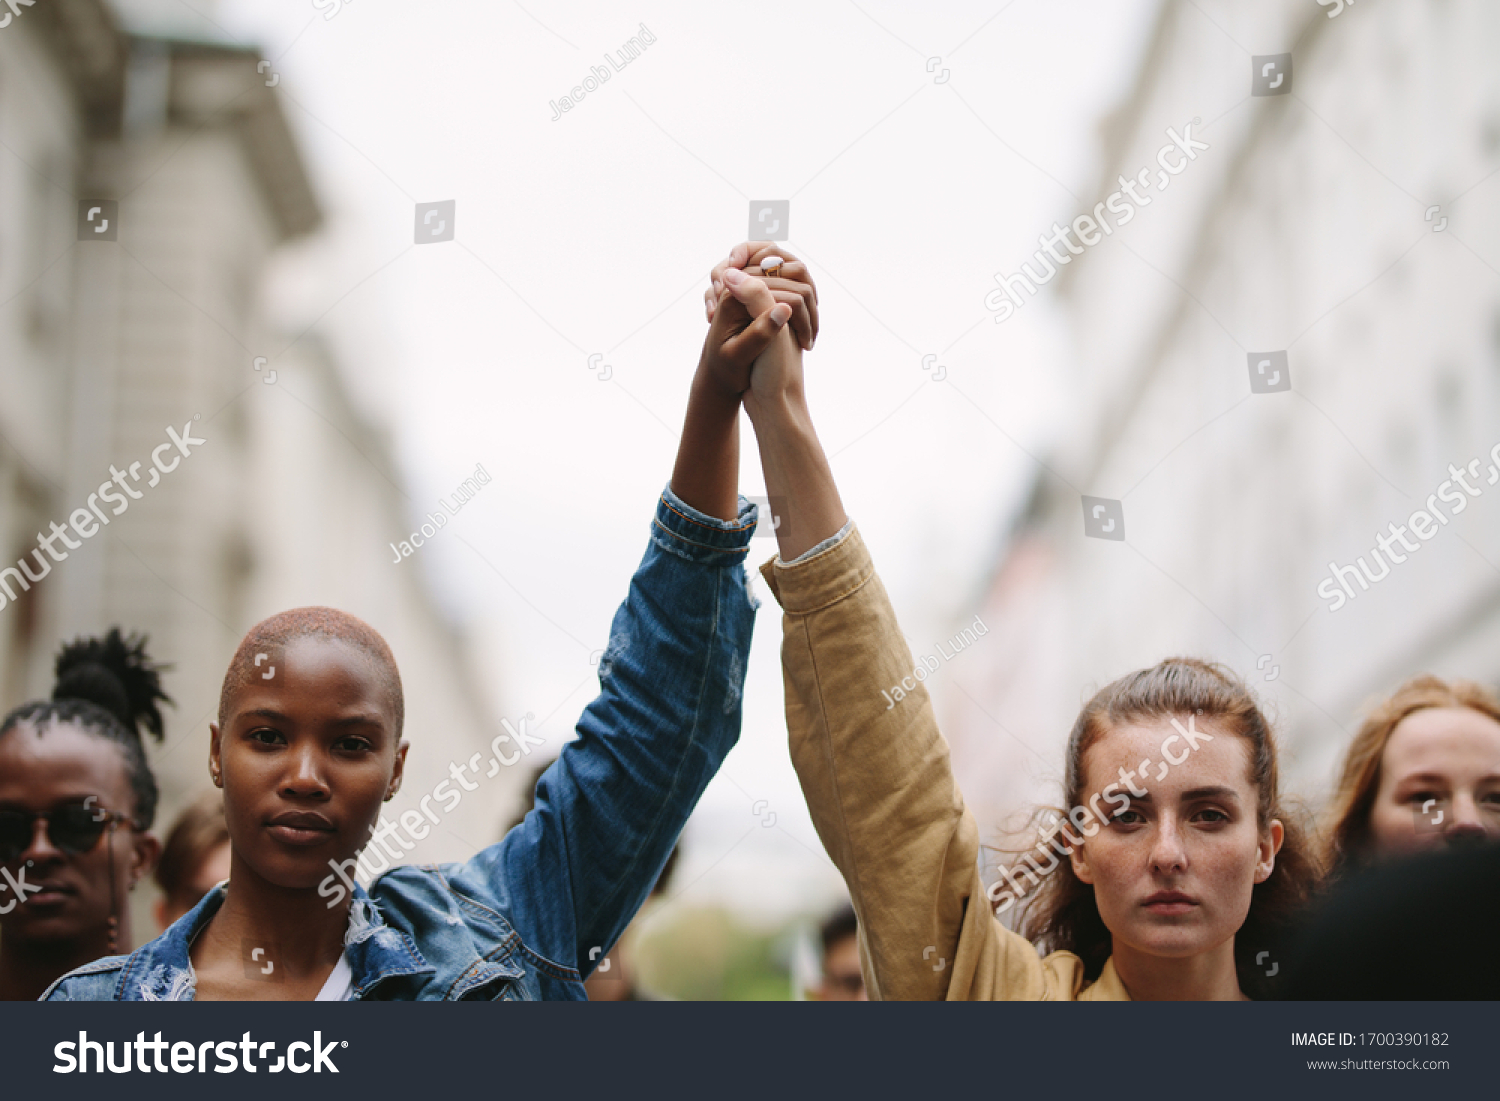 Group of activists with holding hands protesting in the city. Rebellions doing demonstration on the street holding hands. #1700390182